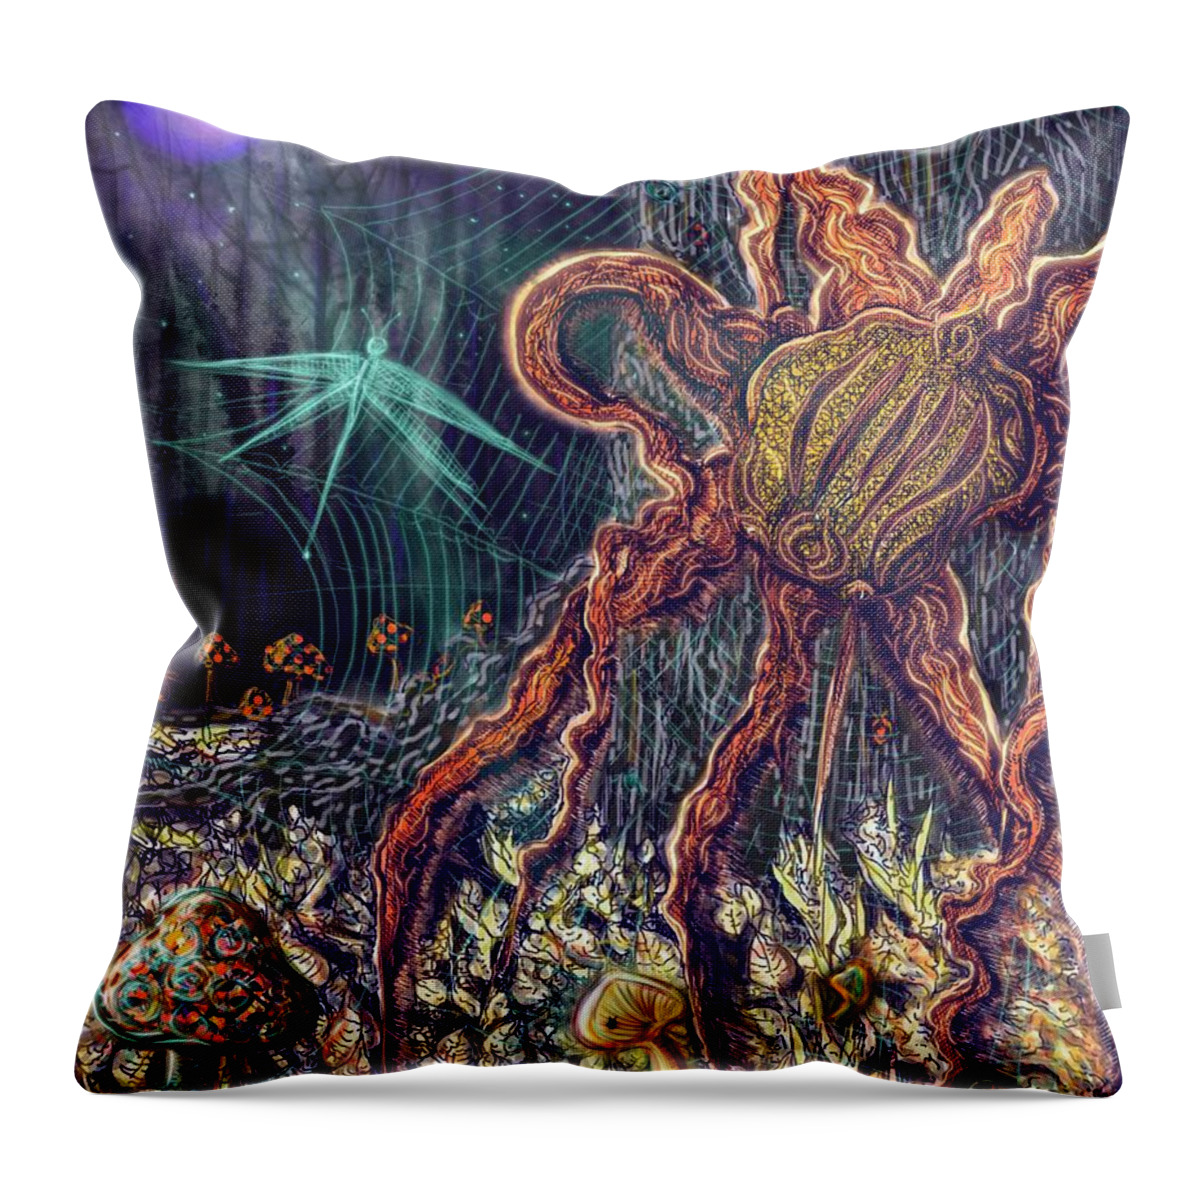 Spider Throw Pillow featuring the digital art Entanglements by Angela Weddle